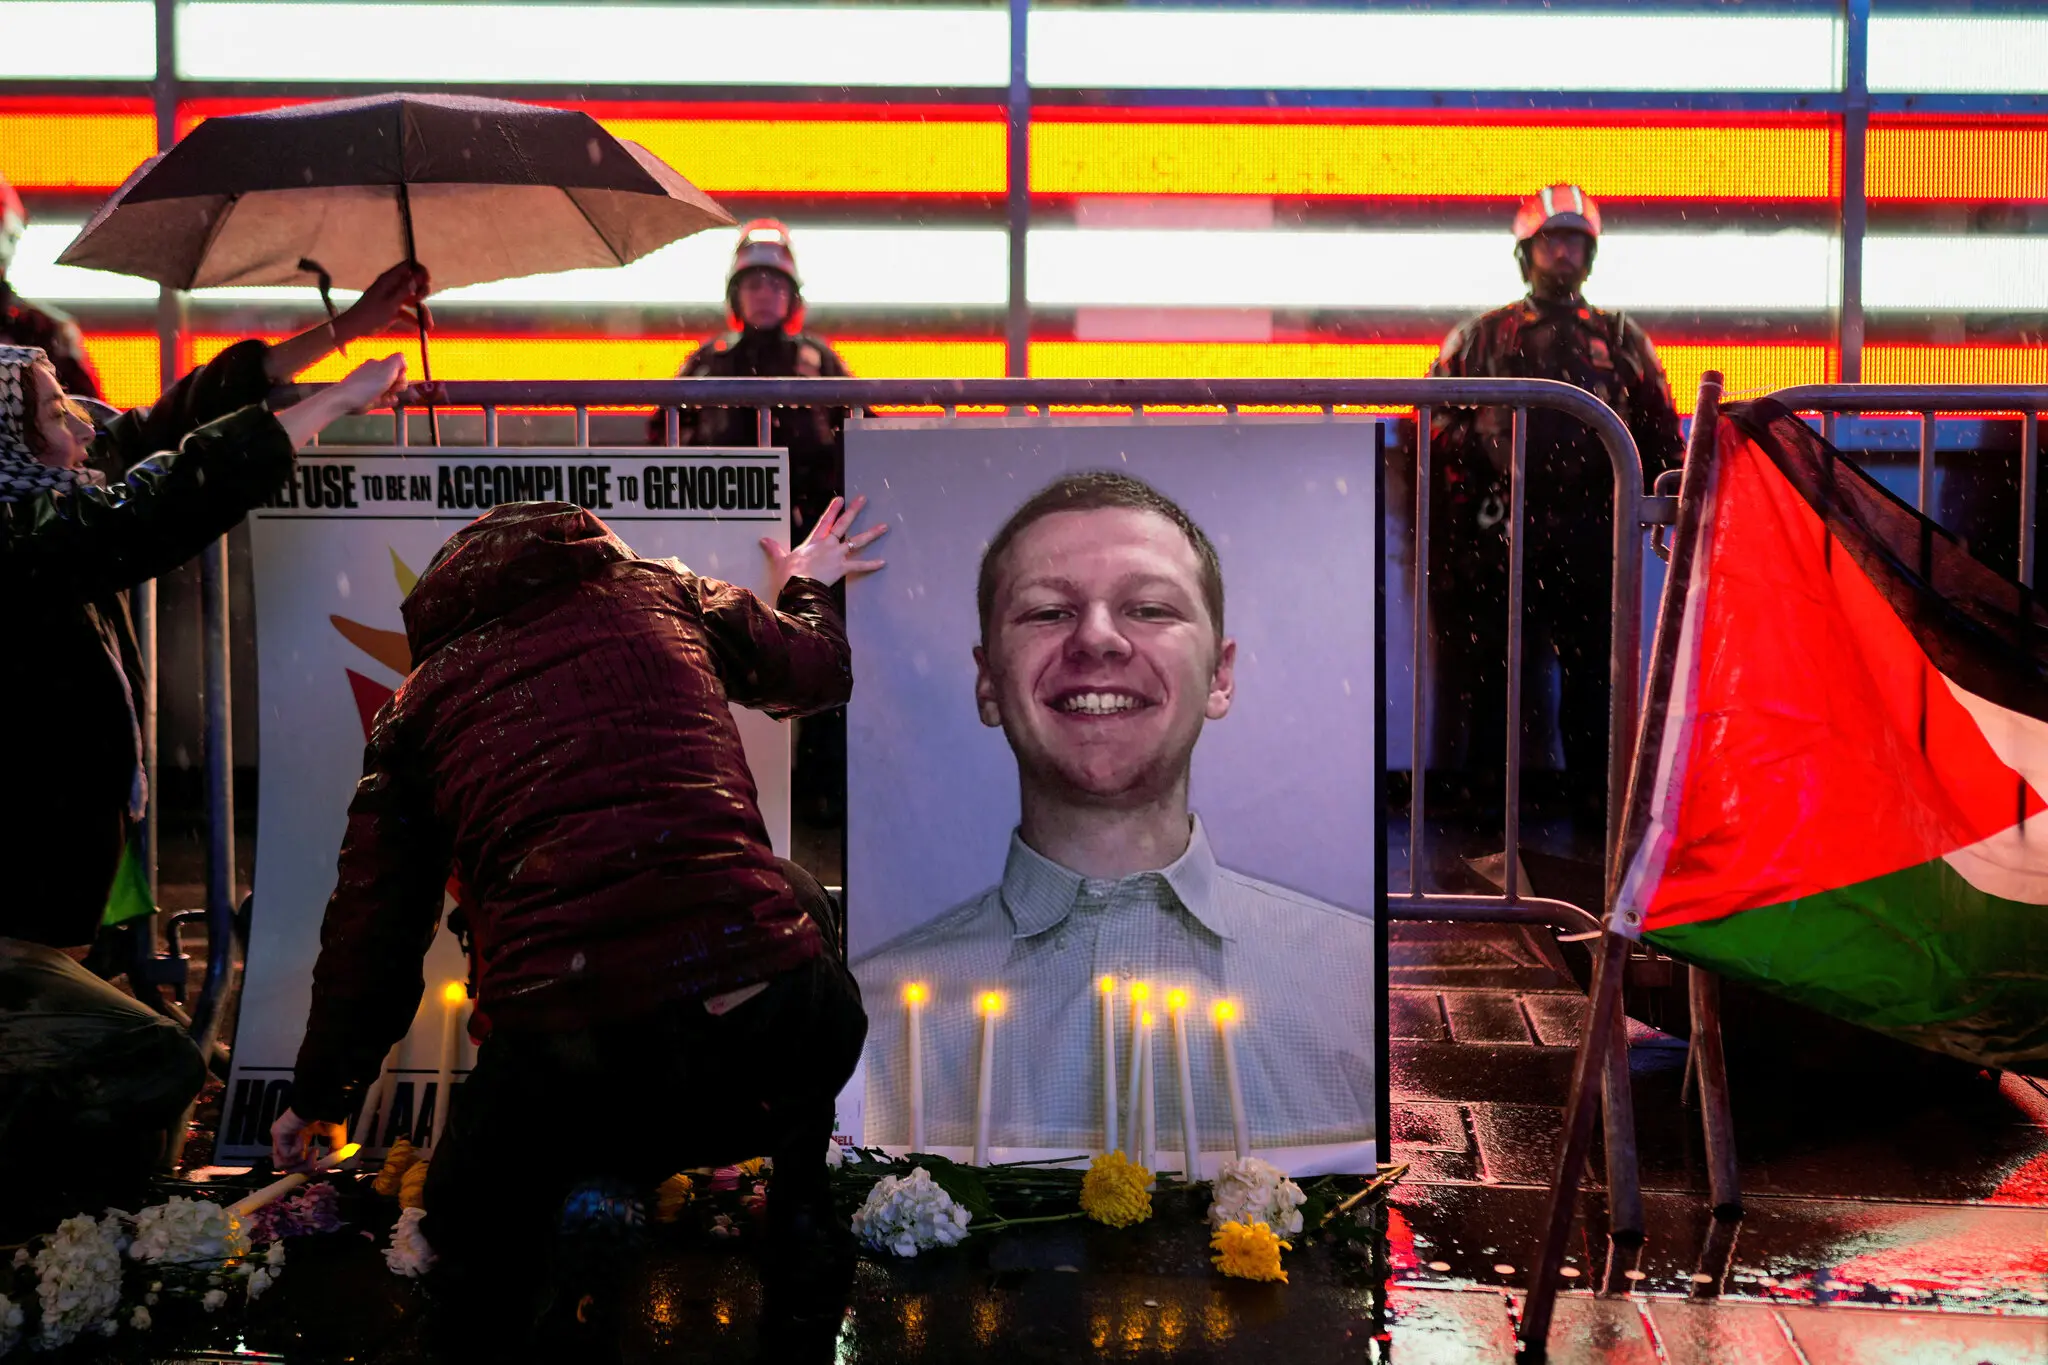 Vigils have been held in several cities, including in New York, U.S., on February 27 , for Aaron Bushnell, after he lit himself on fire outside the Israeli embassy. /Reuters